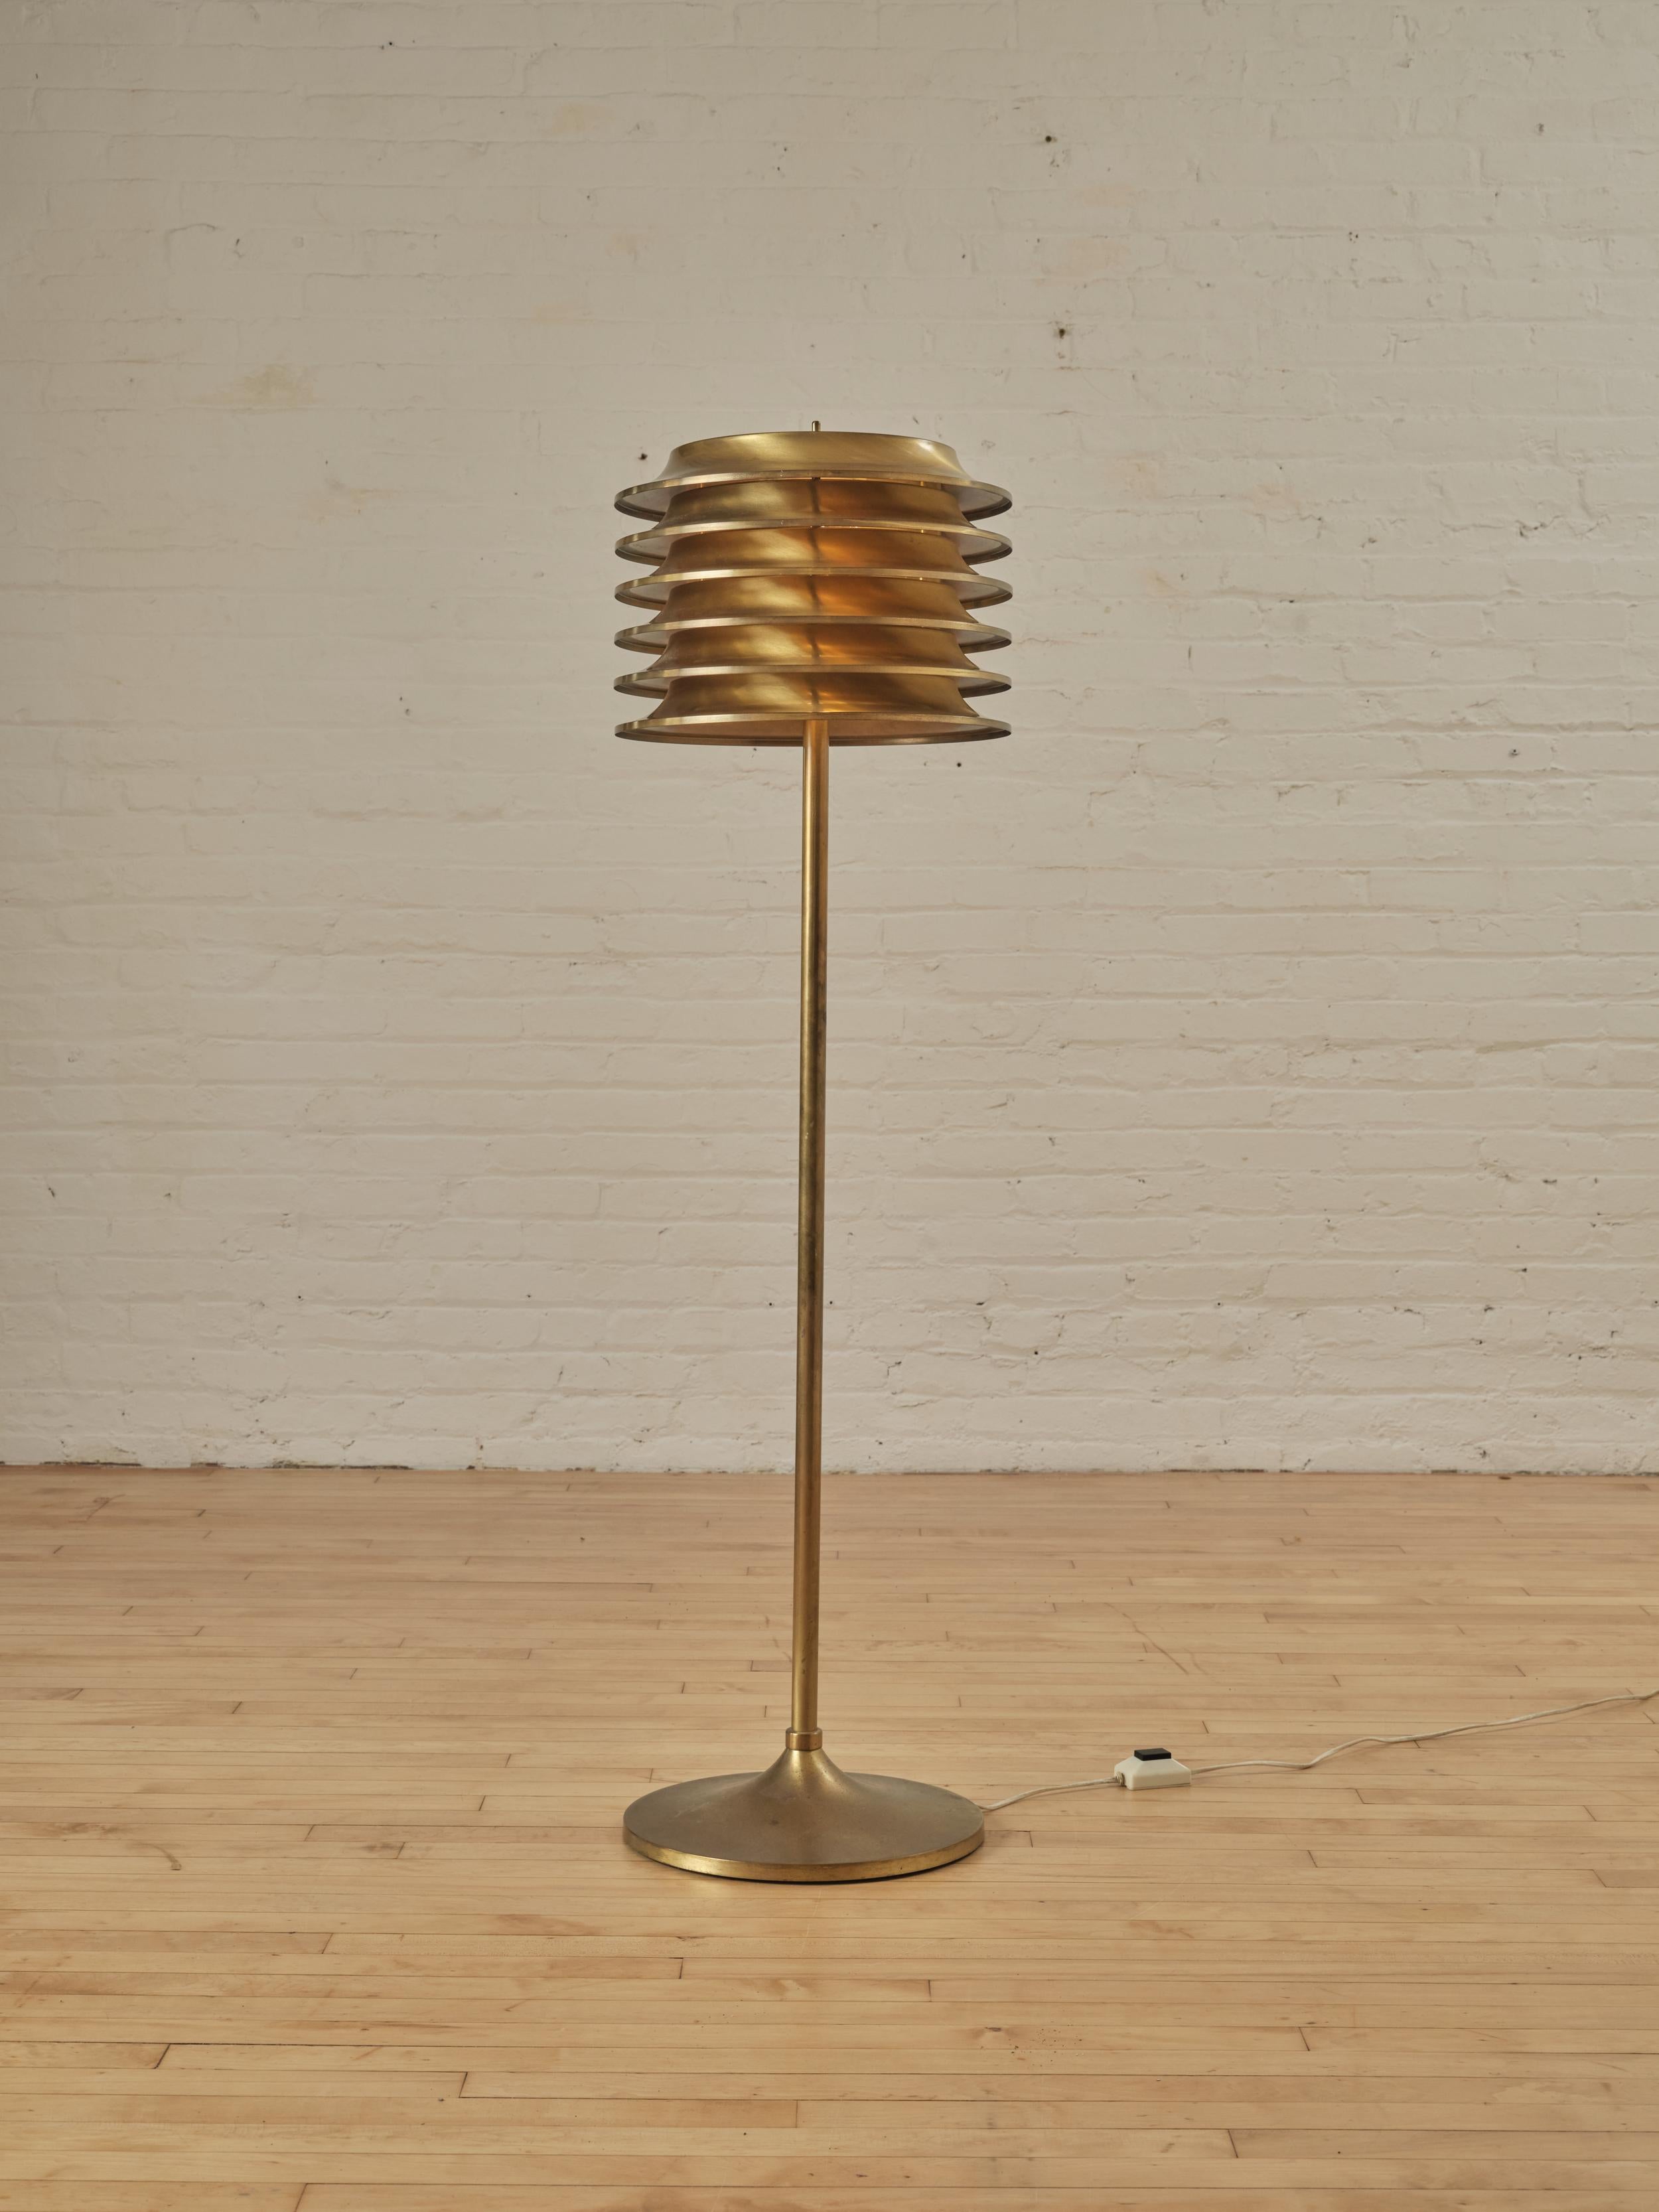 Rare Brass Floor Lamp by Kai Ruokonen for Orno Oy with a large disc shade.

Dimensions: 56.5